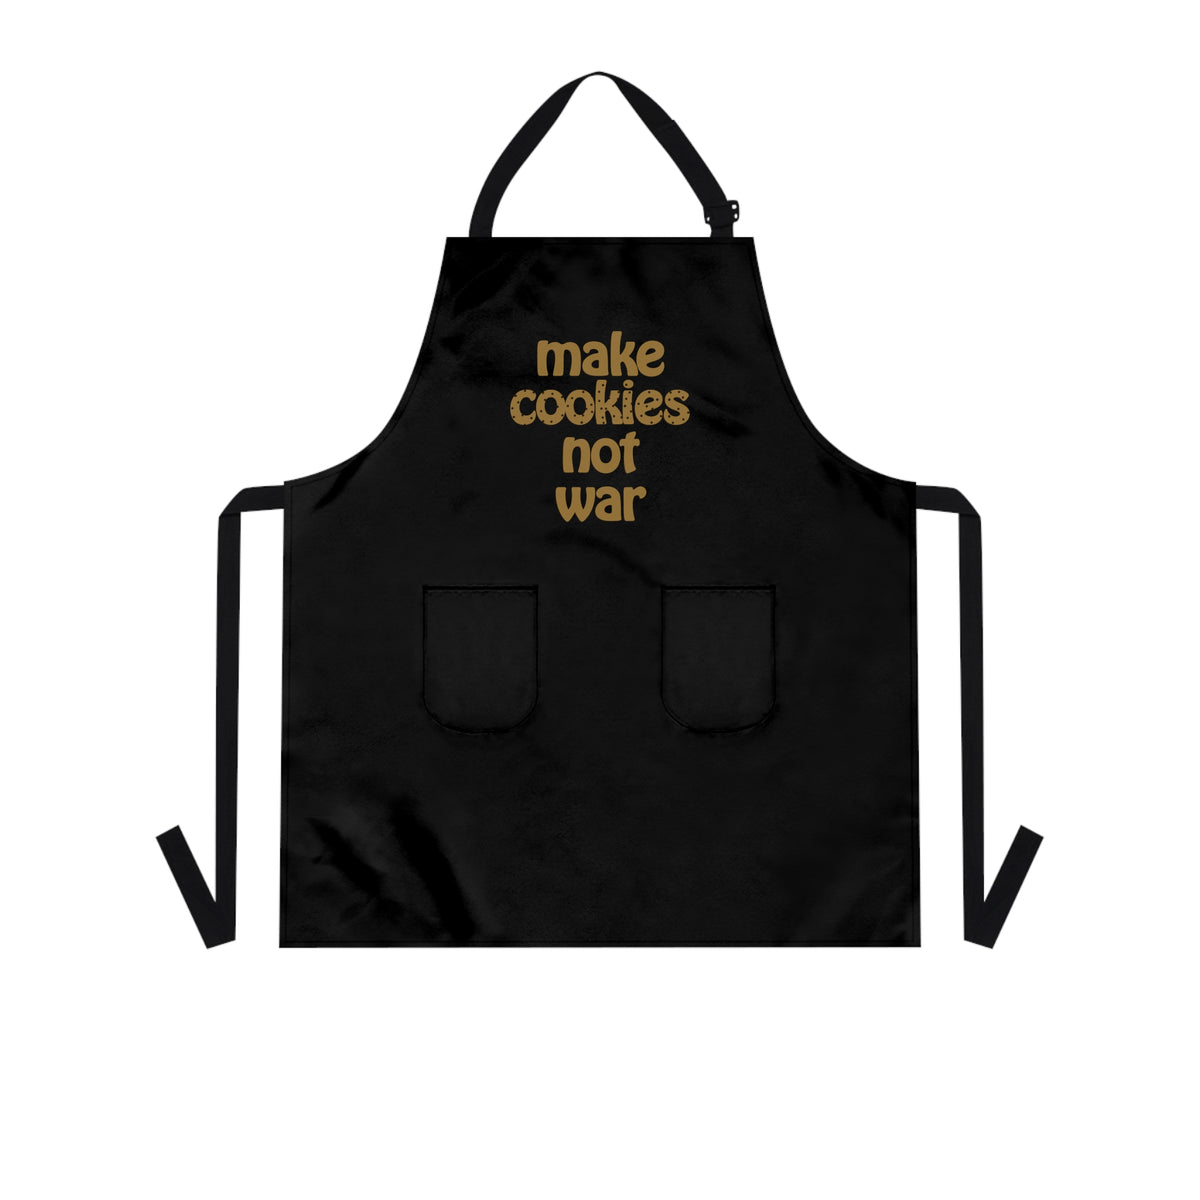 black apron with two pockets that says "make cookies not war"